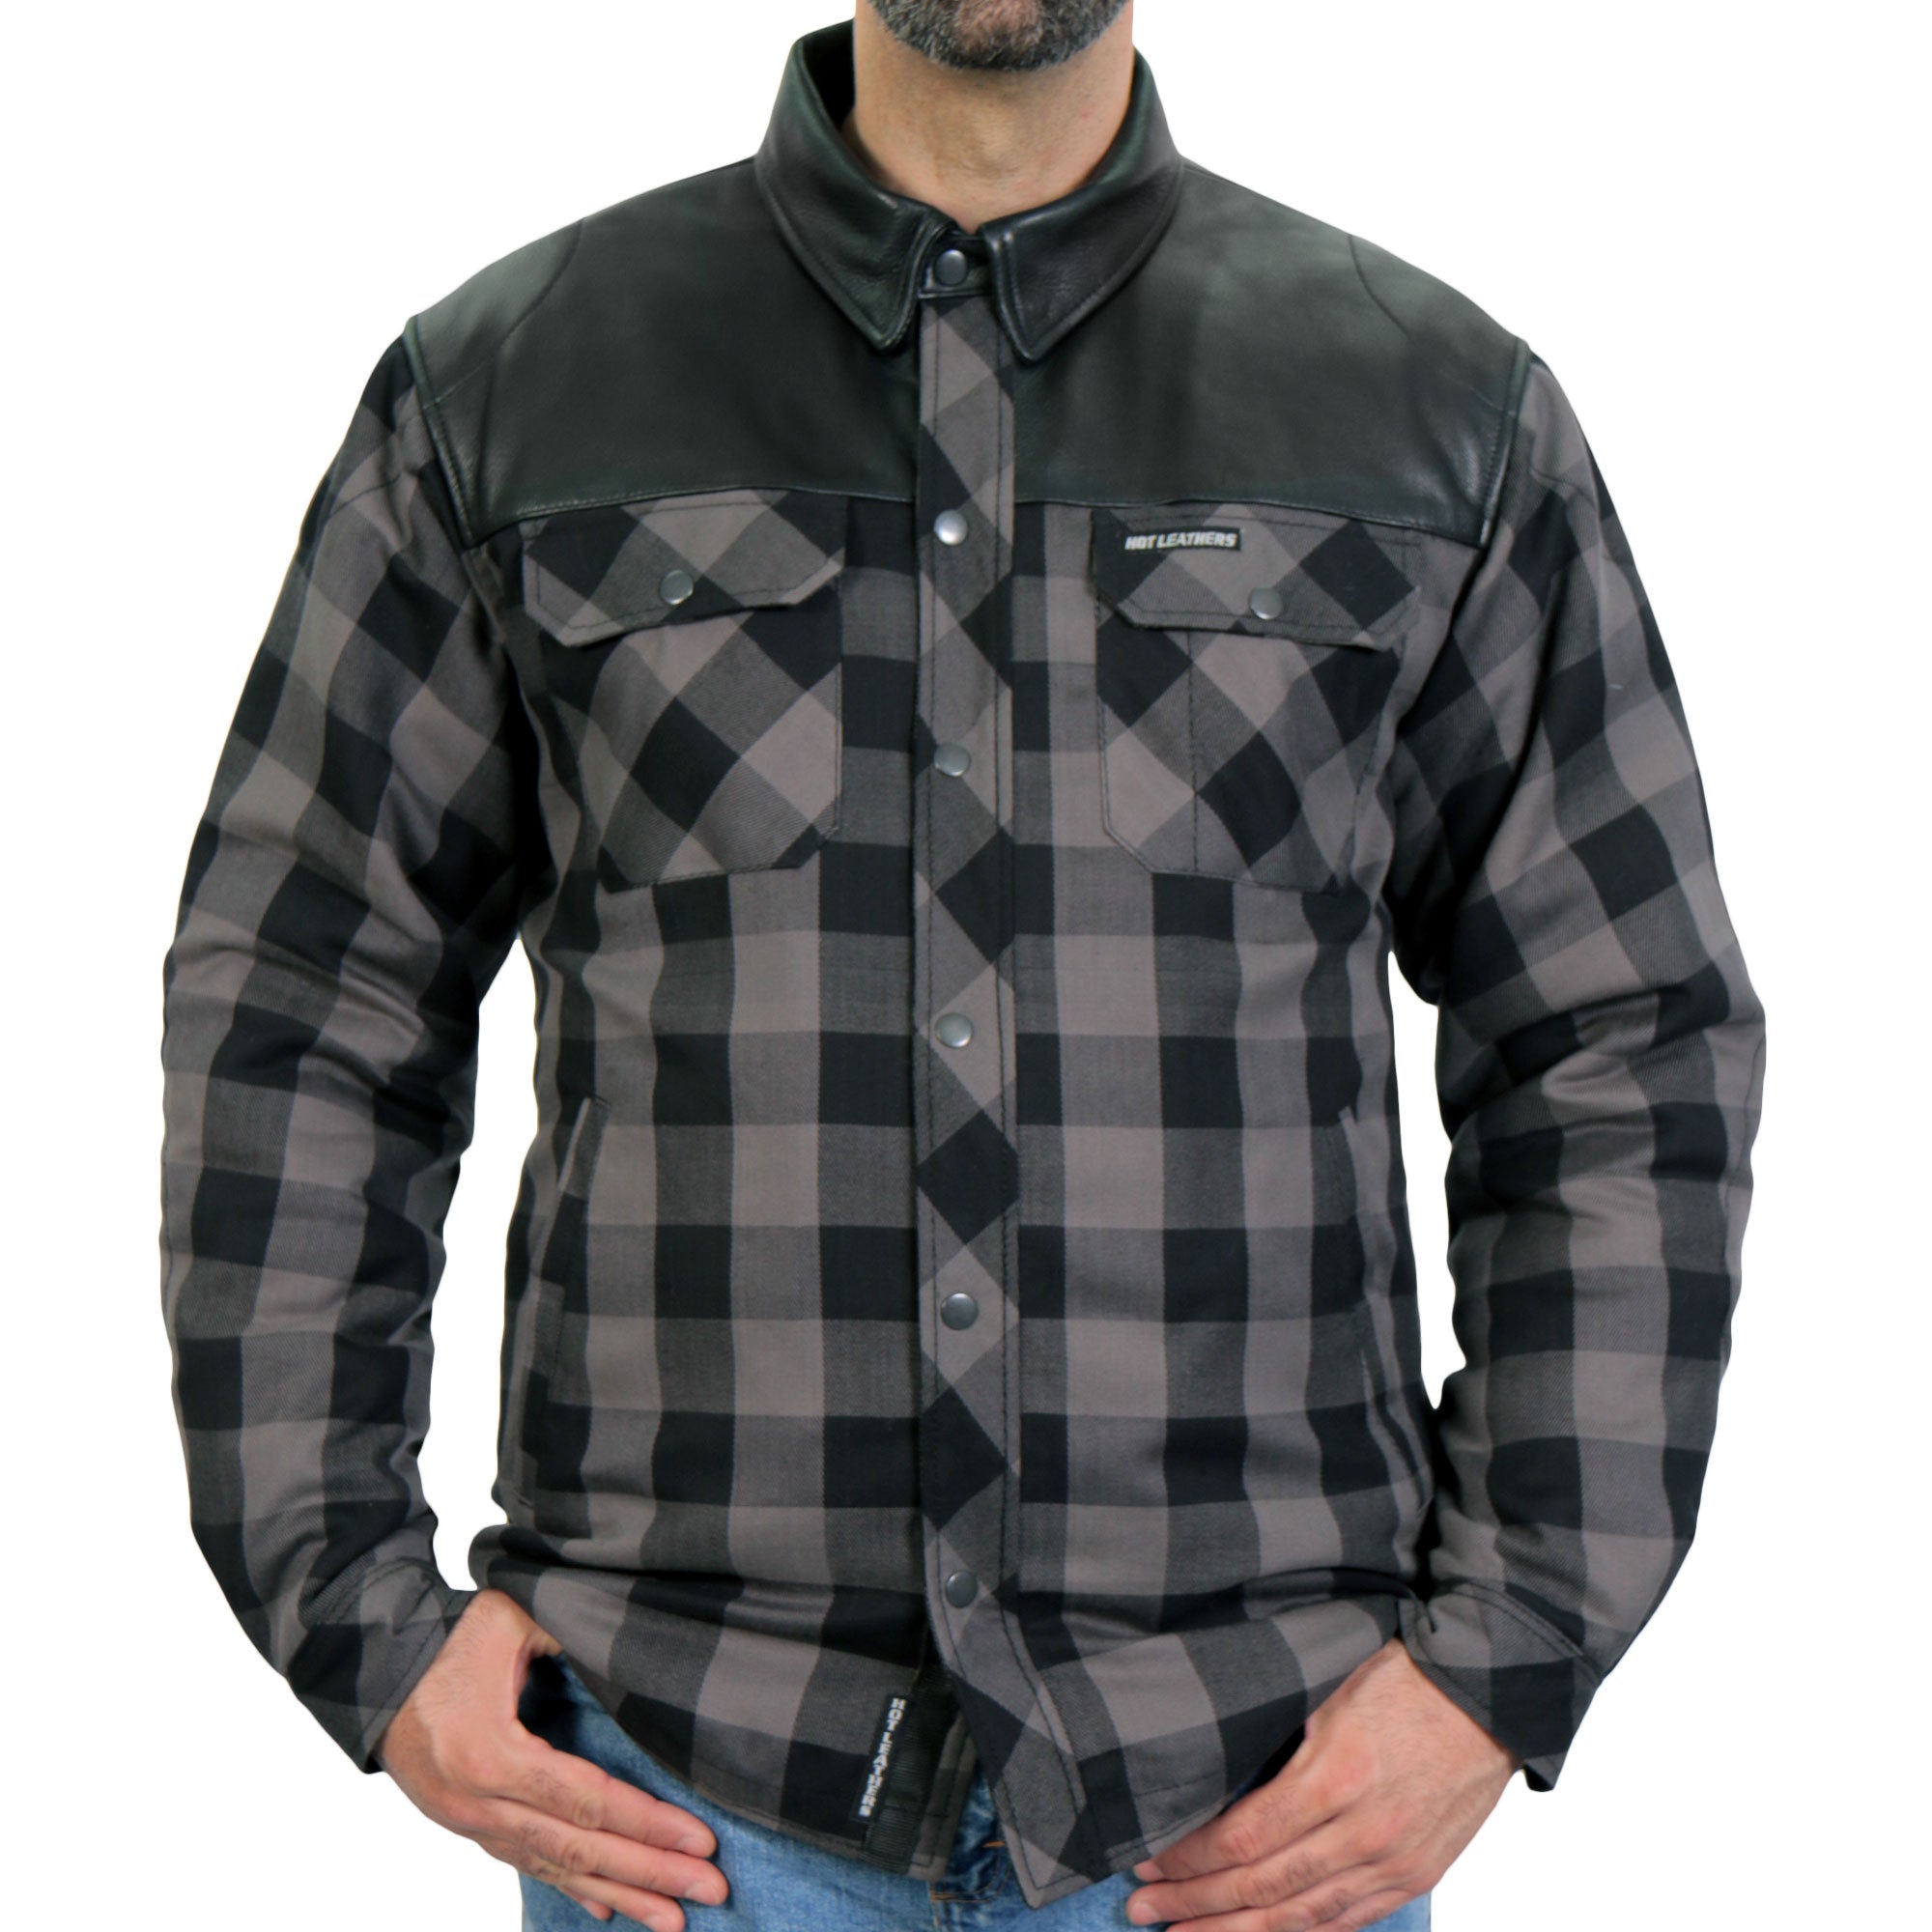 Hot Leathers JKM3203 Men's Motorcycle style Grey and Black Kevlar Reinforced Leather and Plaid Flannel Biker Shirt